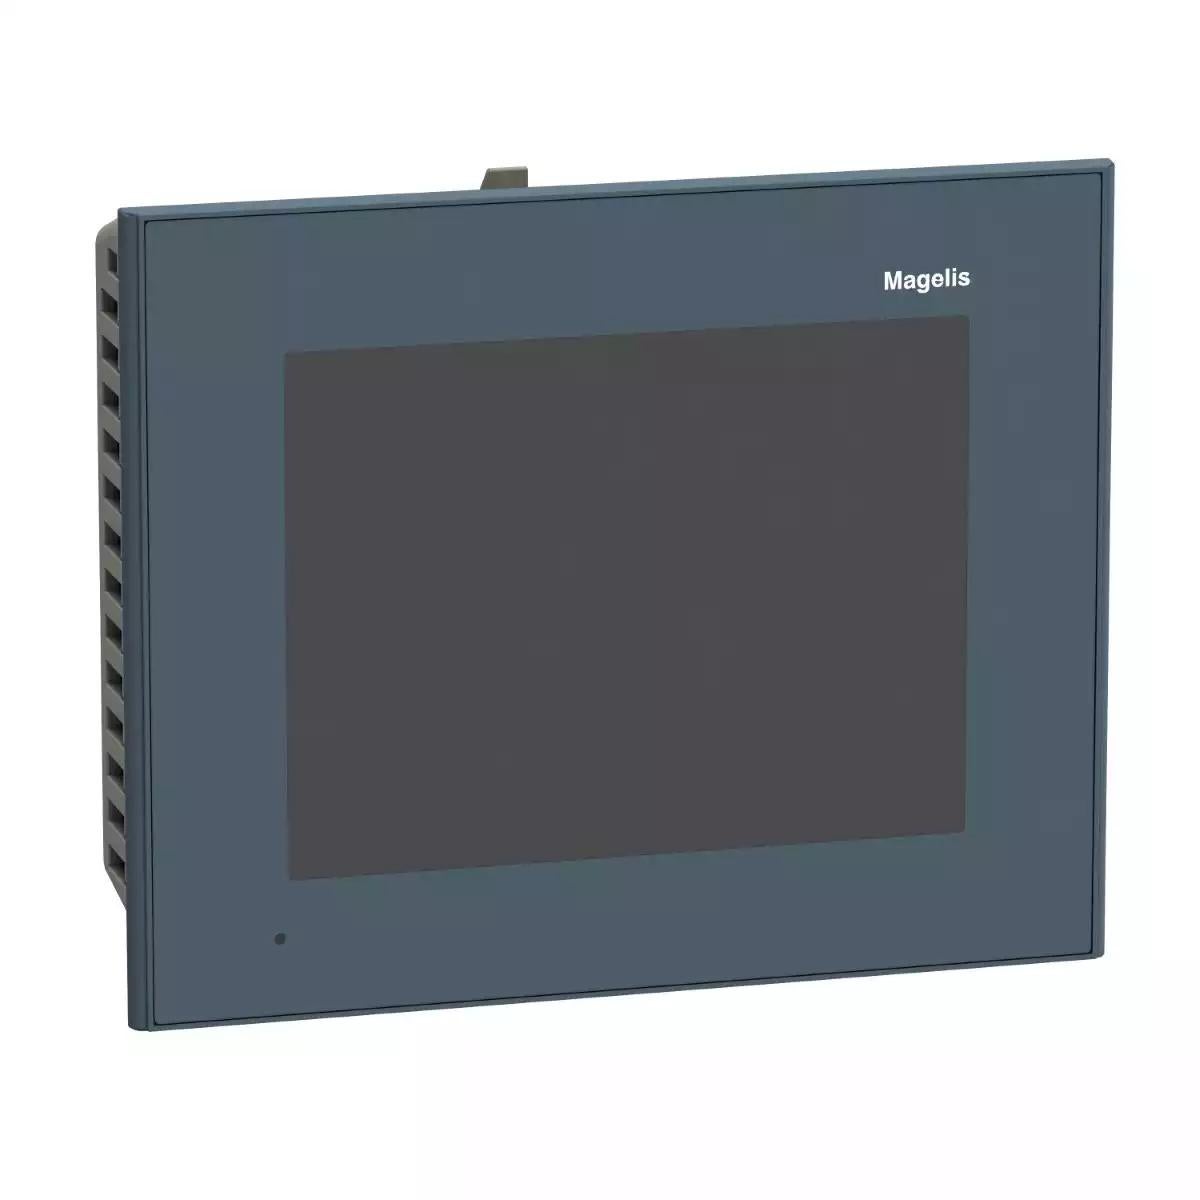 Advanced touchscreen panel, Harmony GTO, 5.7 Color Touch QVGA TFT, logo removed